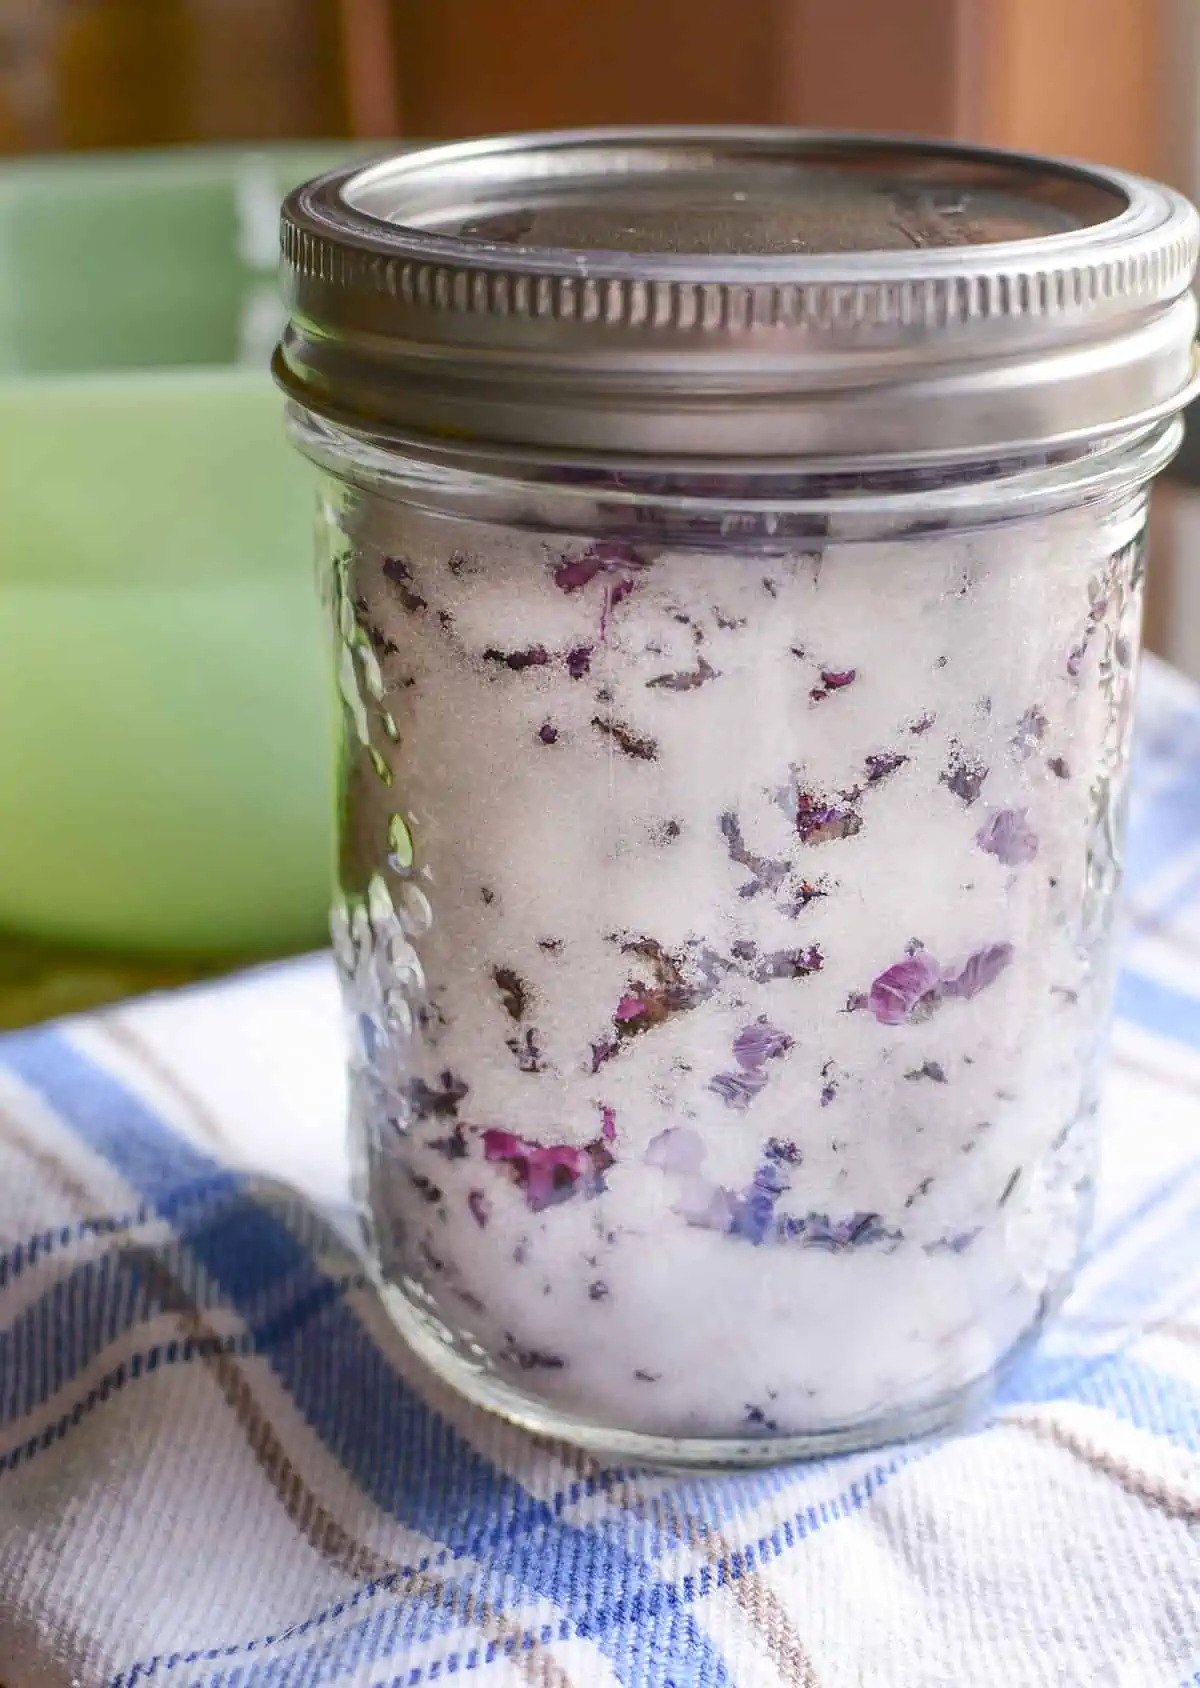 Lilac sugar in a mason jar with a lid on it. The jar is resting on a blue and white checked cloth.